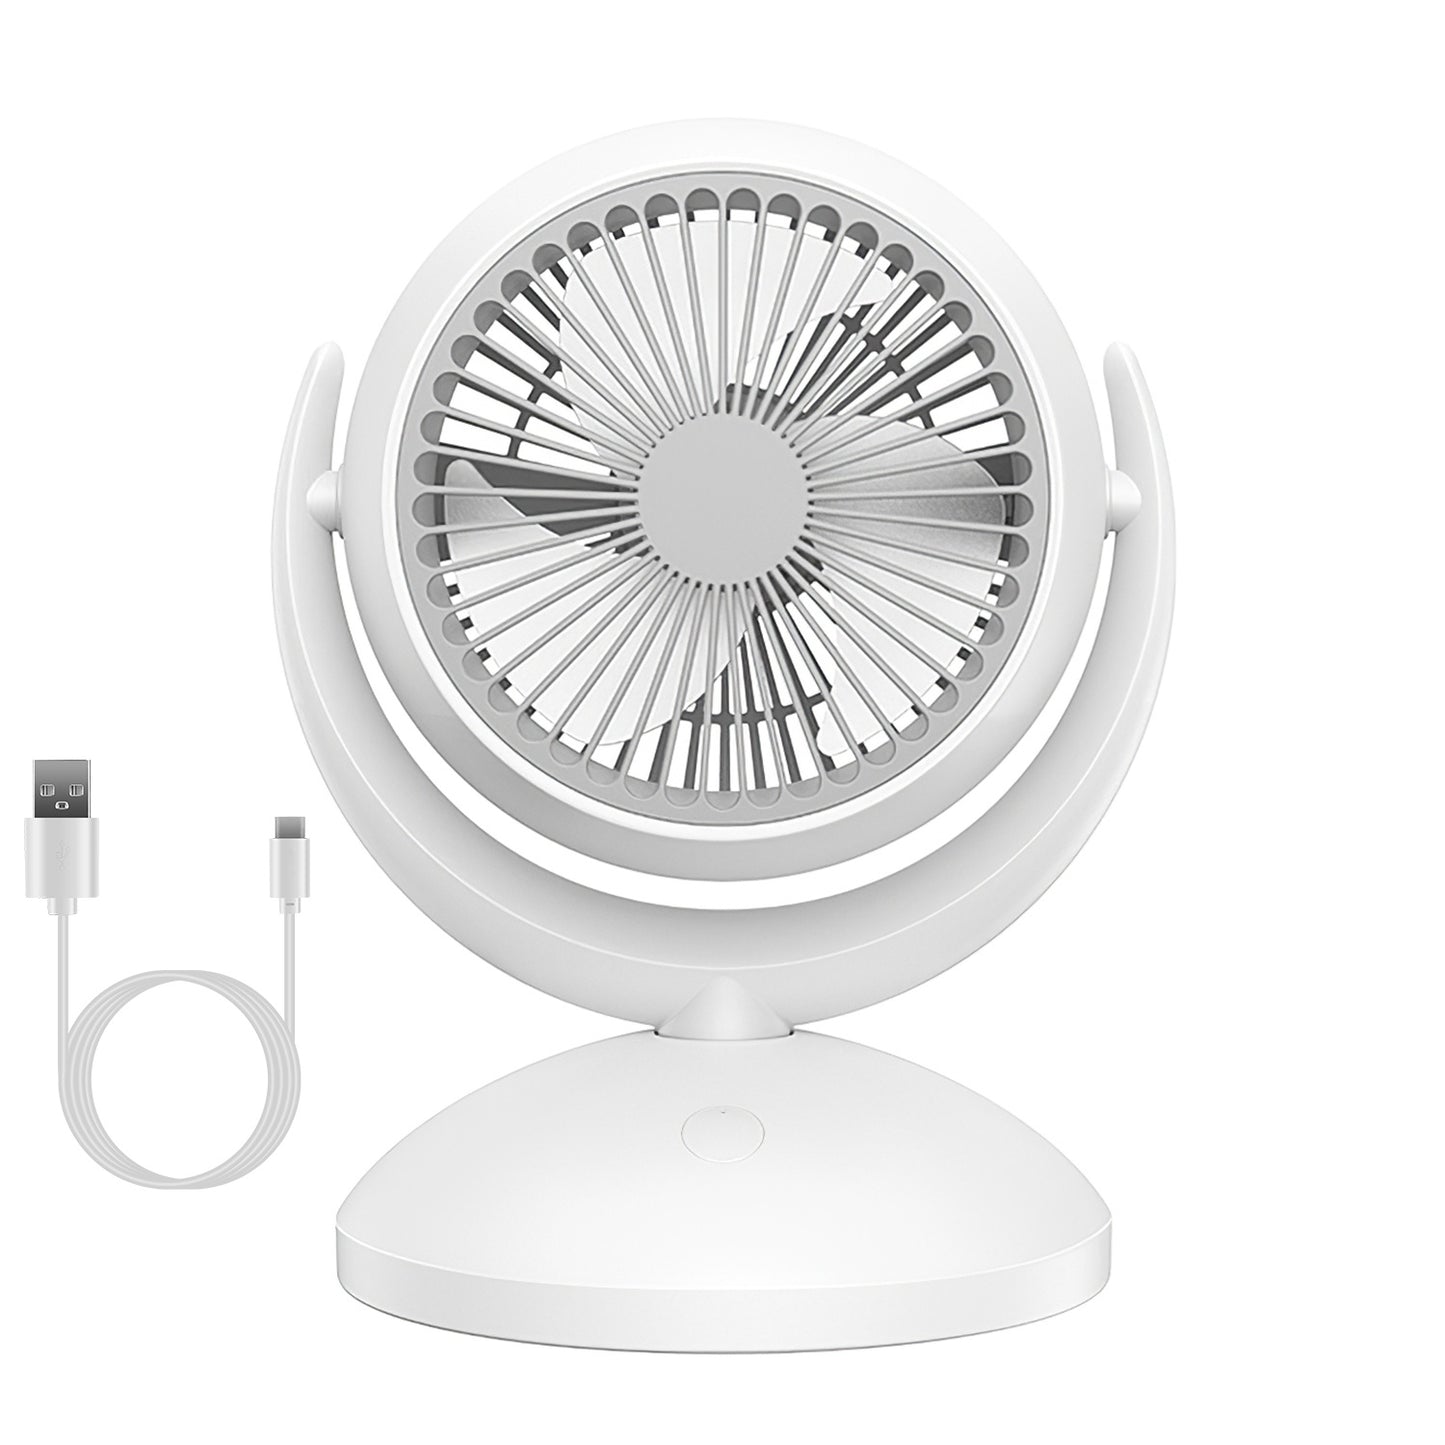 Air Circulator Desk Fan Portable Desktop Rechargeable Oscillating Fan with 4 Speeds 360 Degree Tilt Head Automatic Rotation Quiet 40dB Table Fan for Home Office Bedroom